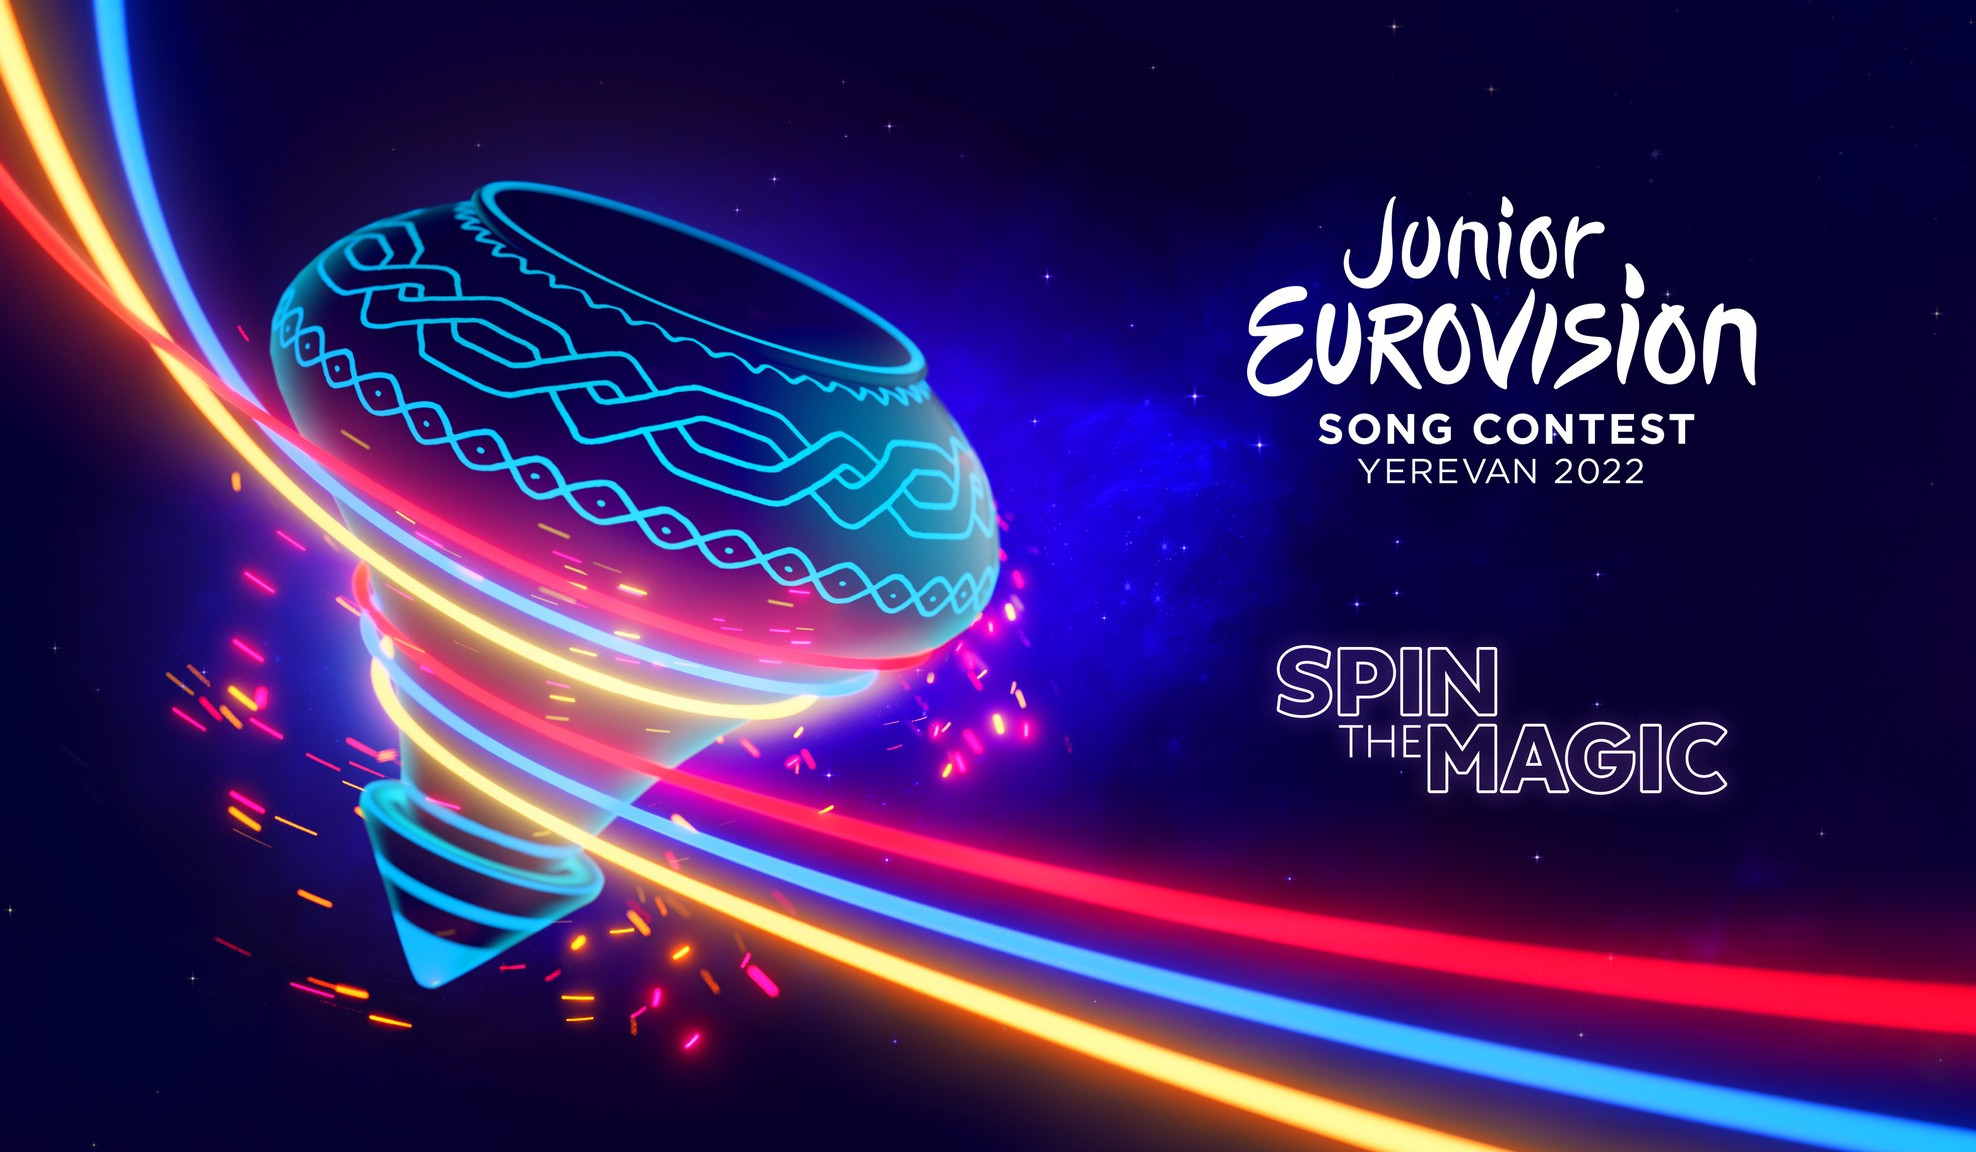 Spin The Magic: 16 countries will unite around 20th cycle of Junior Eurovision